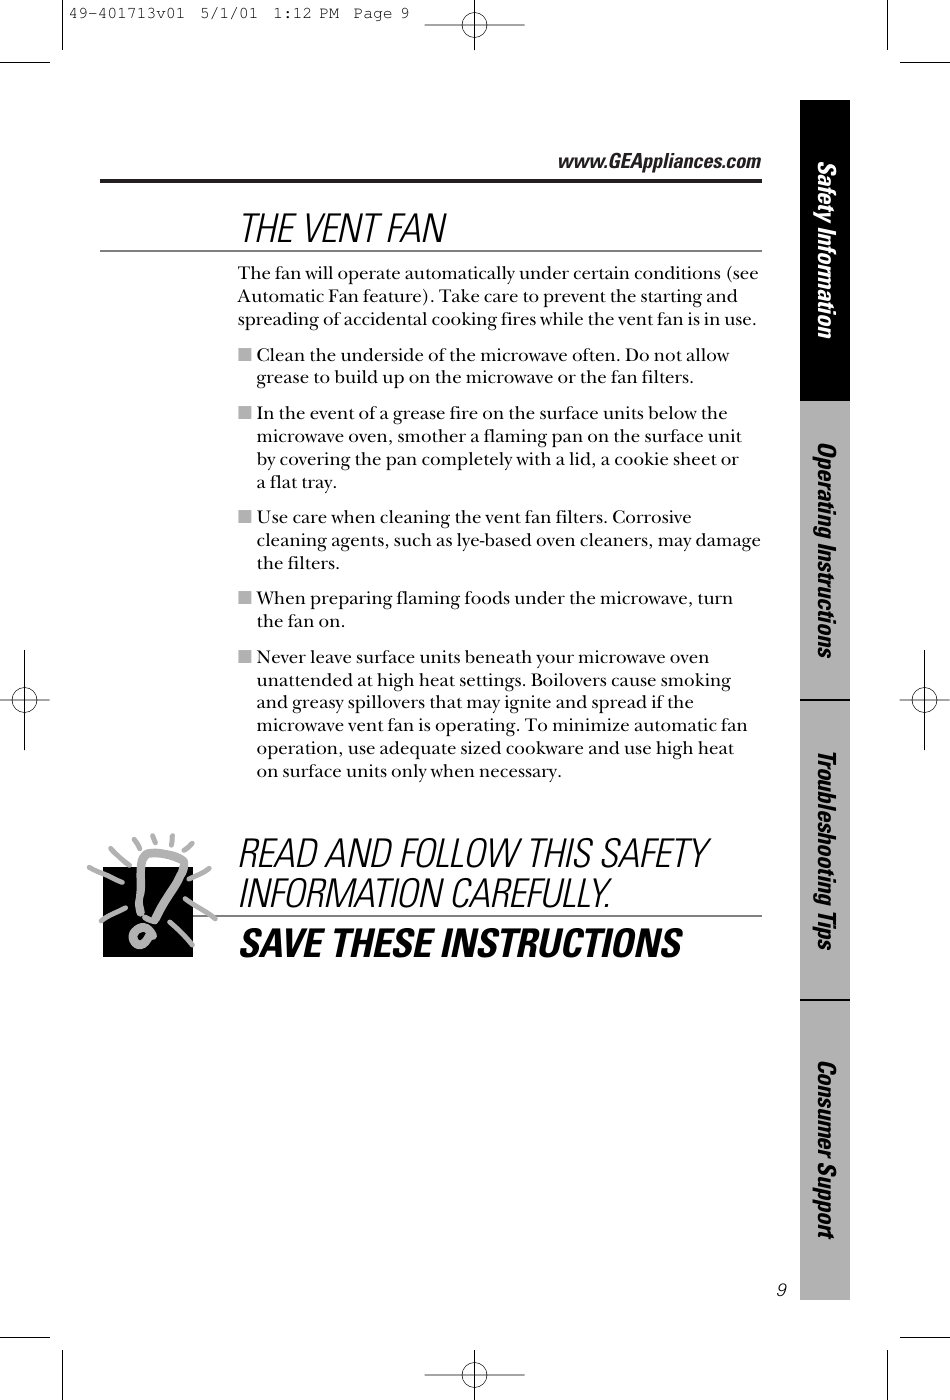 www.GEAppliances.comConsumer SupportTroubleshooting TipsOperating InstructionsSafety Information9The fan will operate automatically under certain conditions (seeAutomatic Fan feature). Take care to prevent the starting andspreading of accidental cooking fires while the vent fan is in use. ■Clean the underside of the microwave often. Do not allowgrease to build up on the microwave or the fan filters.■In the event of a grease fire on the surface units below themicrowave oven, smother a flaming pan on the surface unitby covering the pan completely with a lid, a cookie sheet or a flat tray.■Use care when cleaning the vent fan filters. Corrosivecleaning agents, such as lye-based oven cleaners, may damagethe filters.■When preparing flaming foods under the microwave, turnthe fan on. ■Never leave surface units beneath your microwave ovenunattended at high heat settings. Boilovers cause smokingand greasy spillovers that may ignite and spread if themicrowave vent fan is operating. To minimize automatic fanoperation, use adequate sized cookware and use high heat on surface units only when necessary.THE VENT FANREAD AND FOLLOW THIS SAFETYINFORMATION CAREFULLY.SAVE THESE INSTRUCTIONS49-401713v01  5/1/01  1:12 PM  Page 9